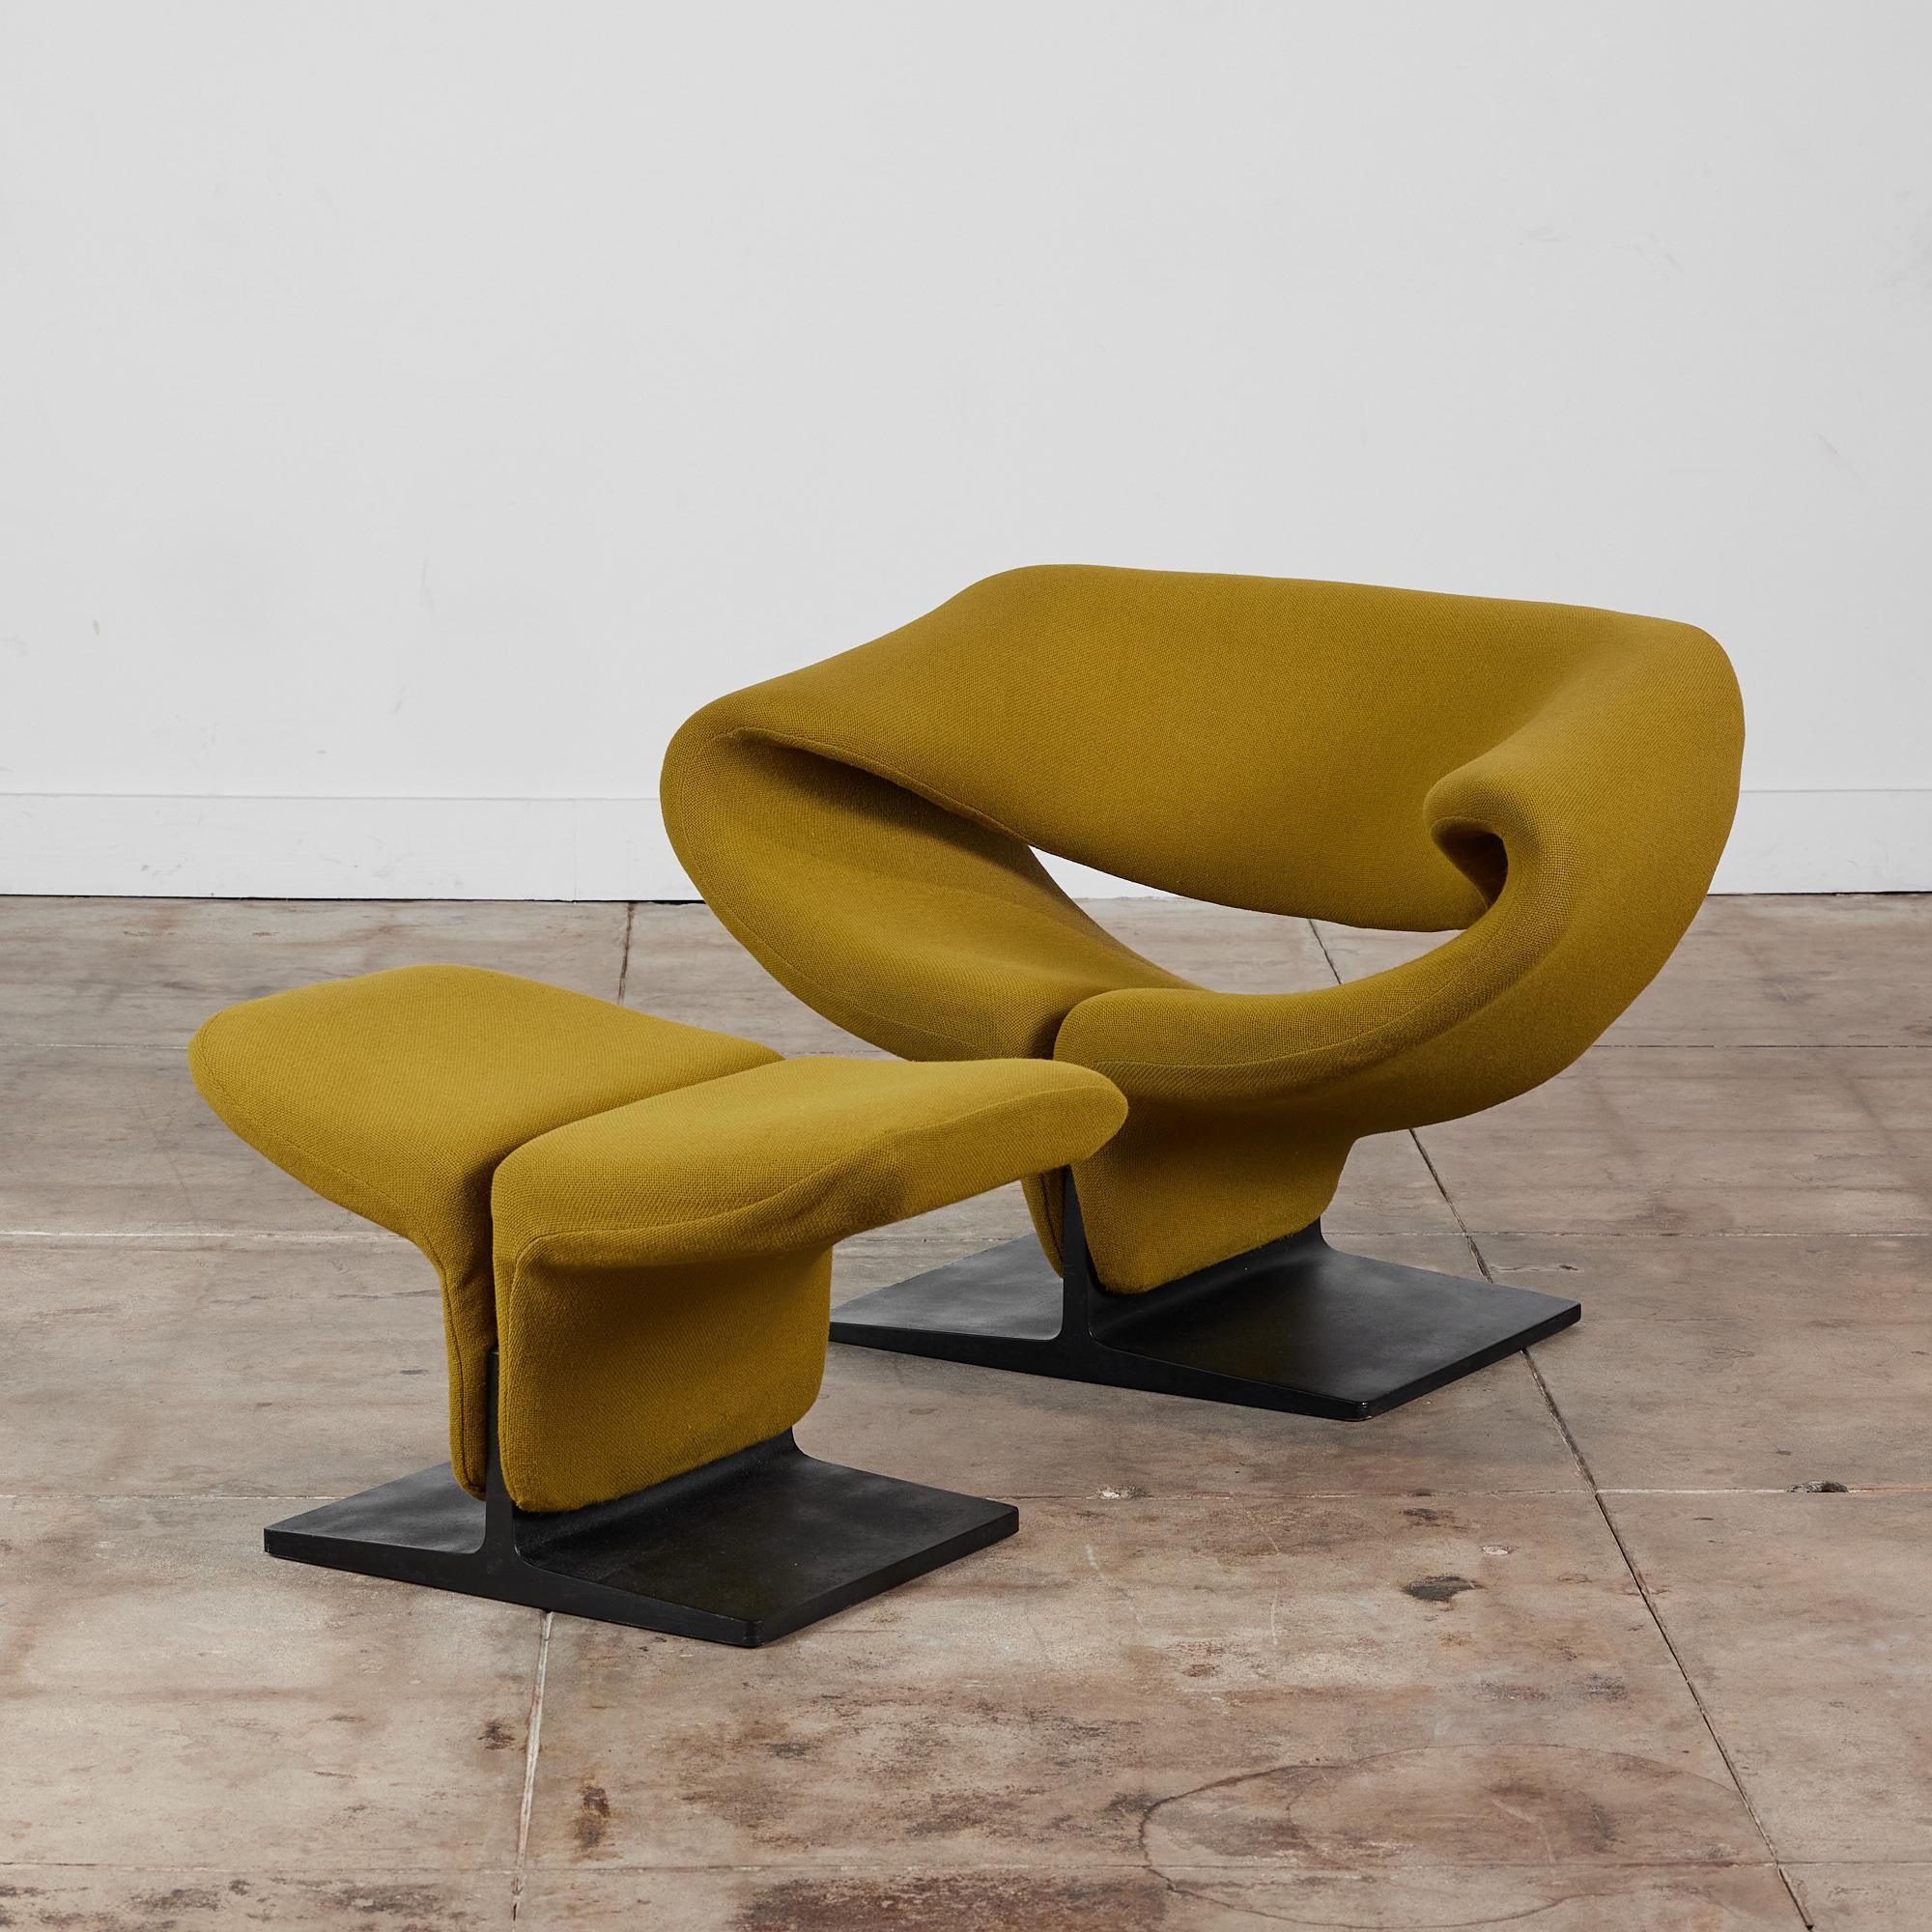 Pierre Paulin designed sculptural lounge chair and ottoman for Artifort, c.1960s, France. The 